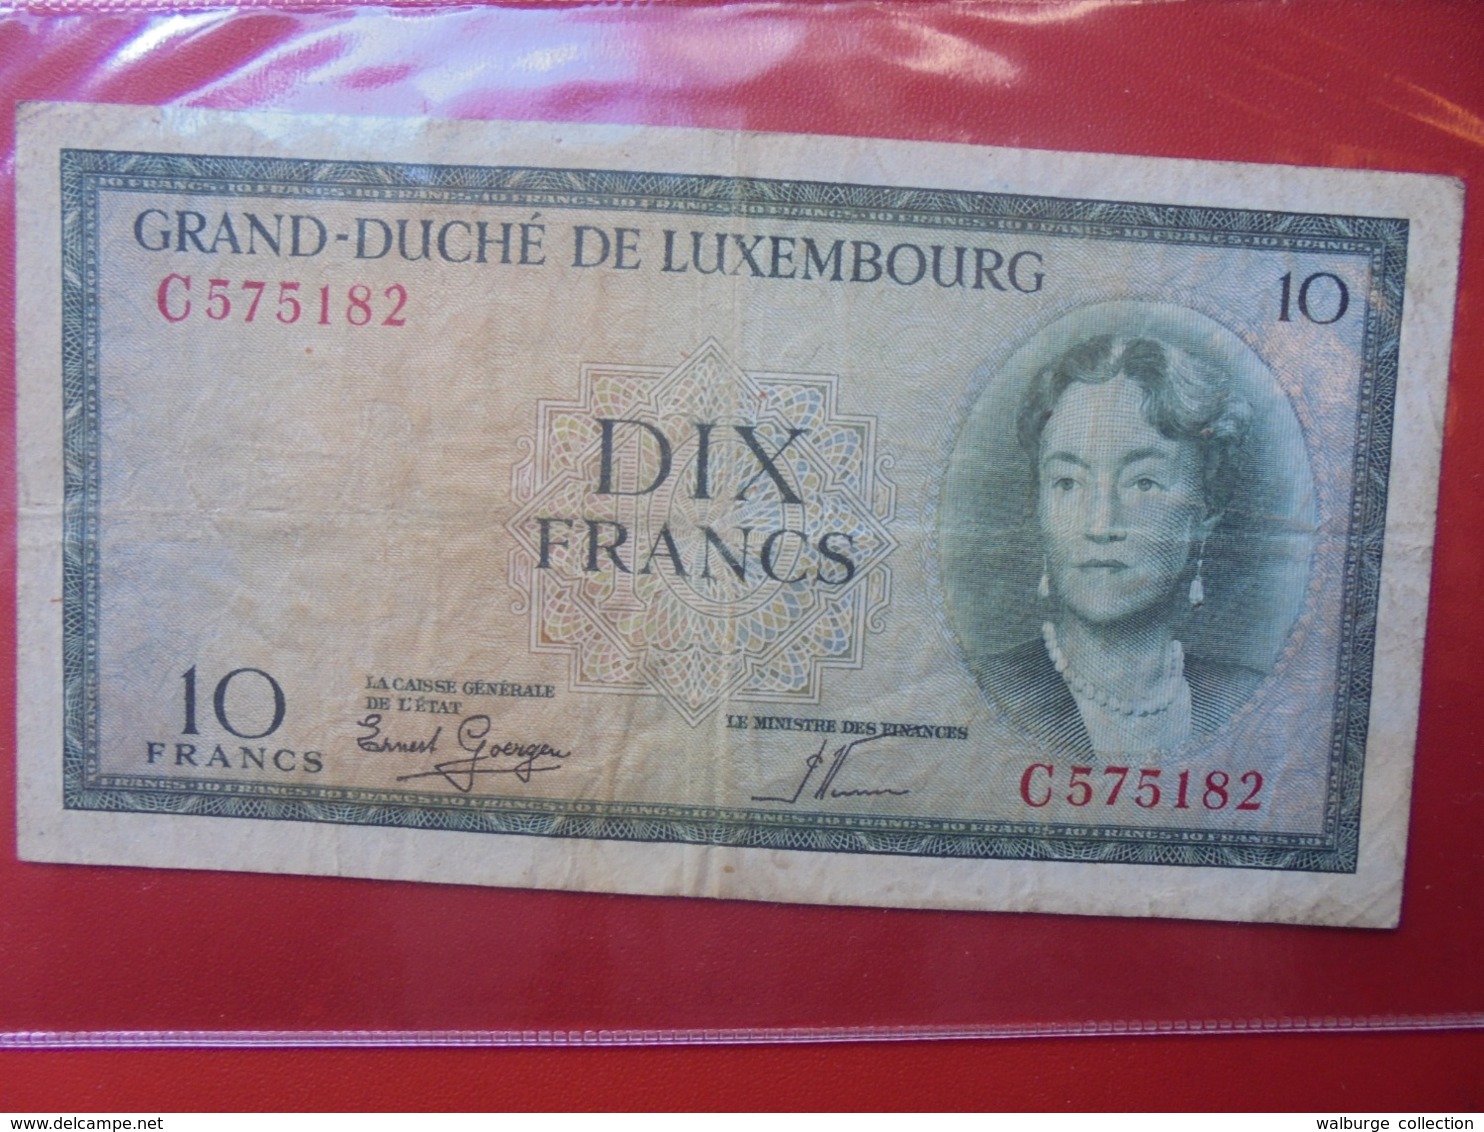 LUXEMBOURG 10 FRANCS (NON-DATE) CIRCULER (B.7) - Luxembourg